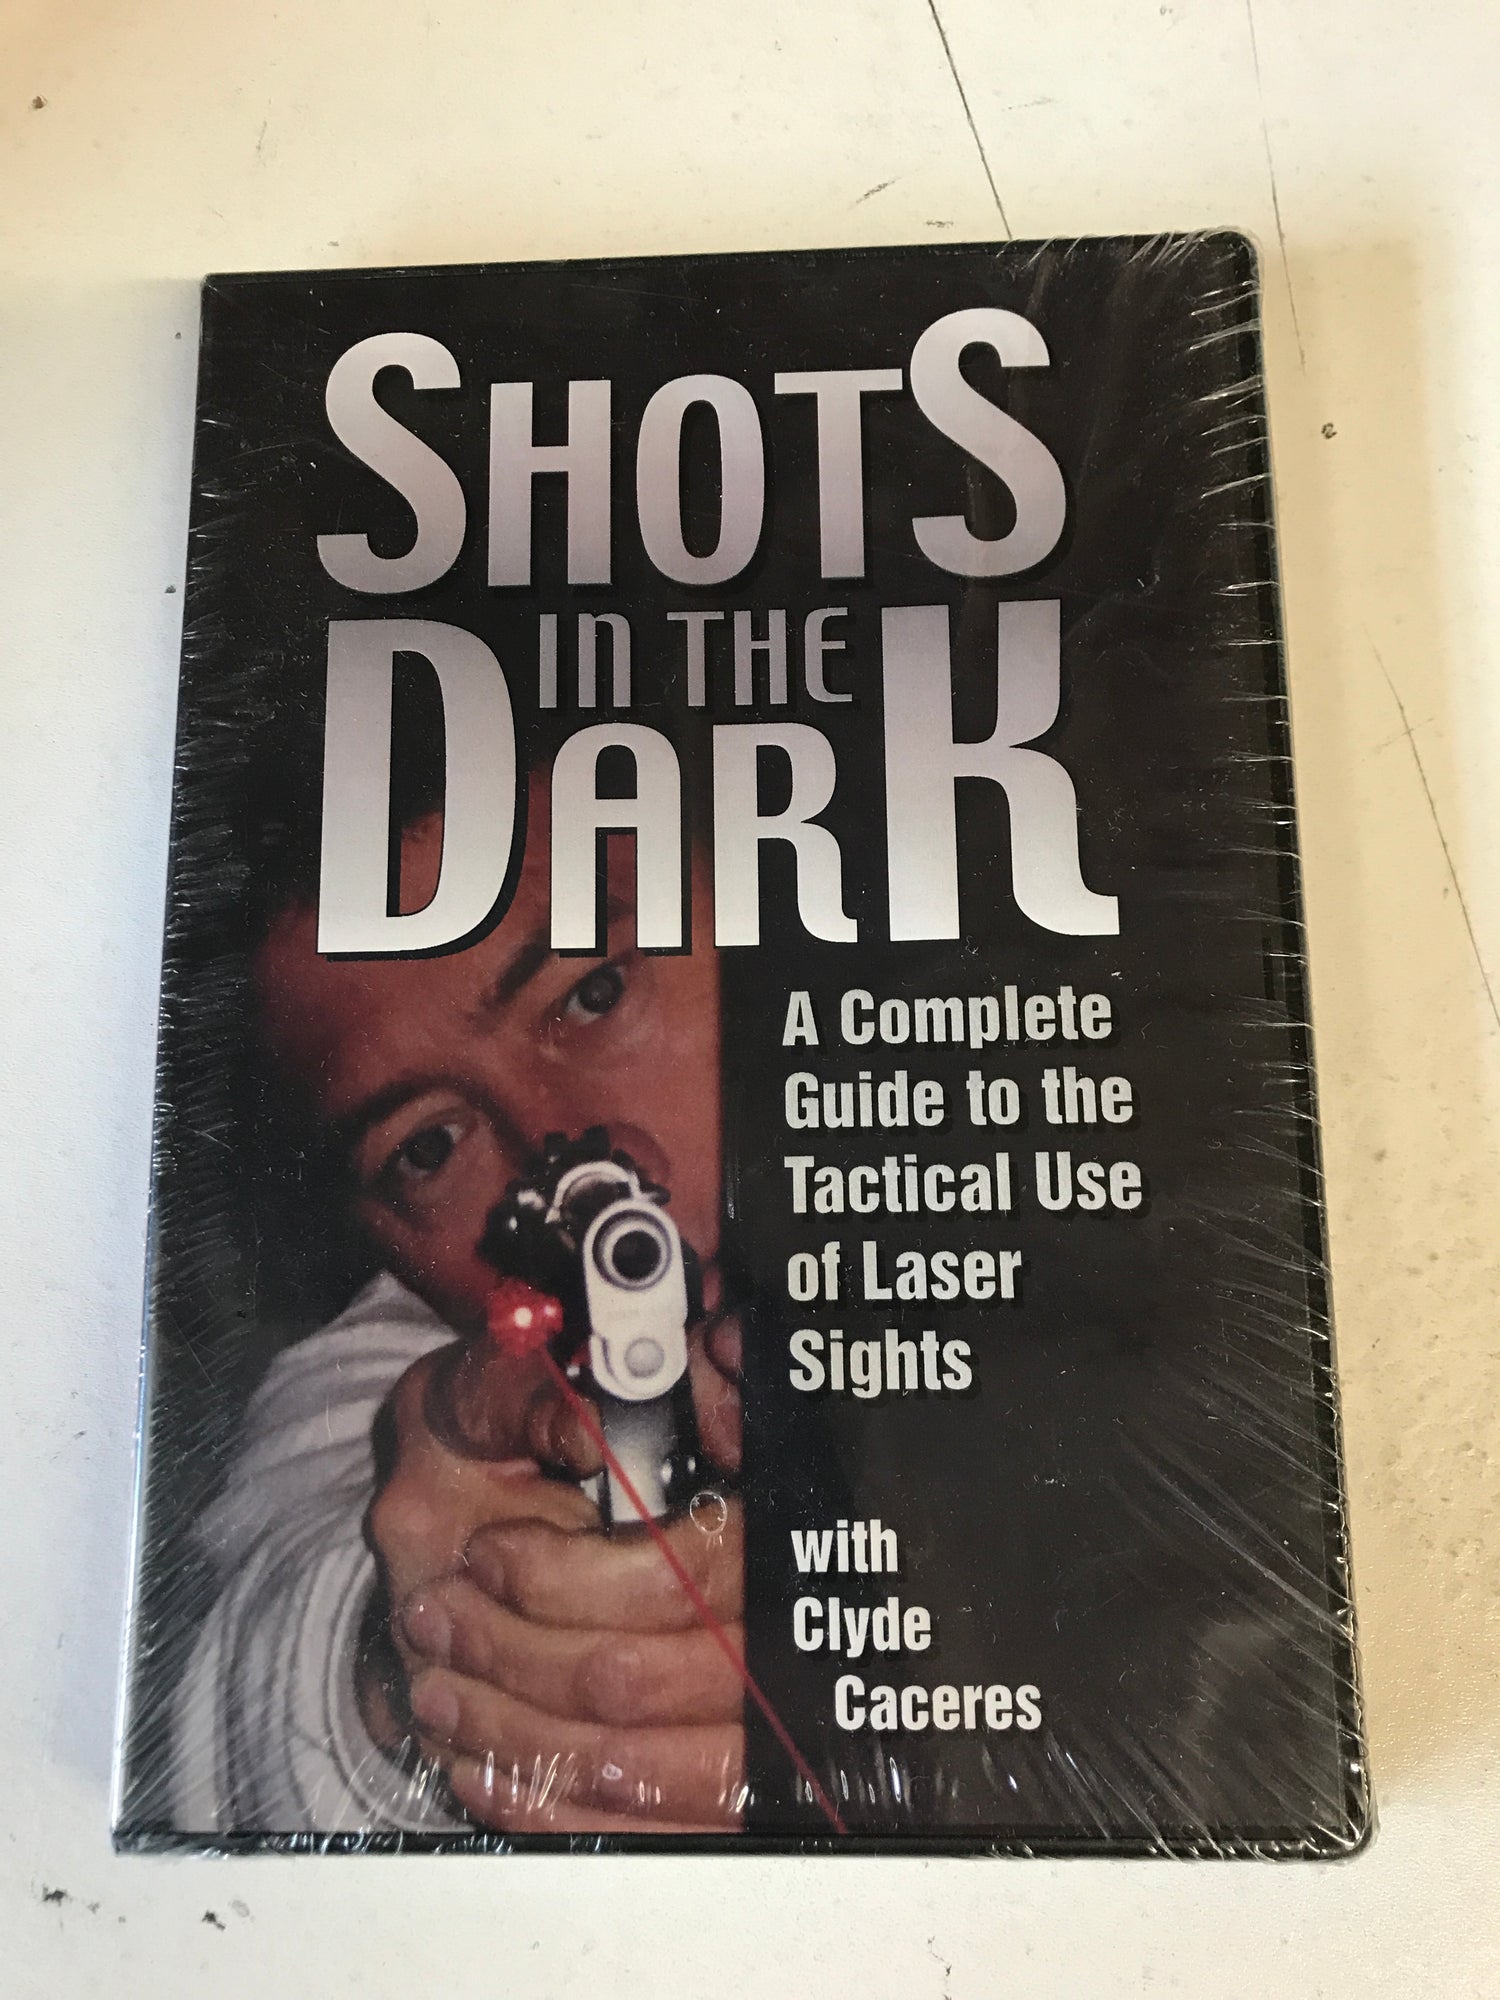 Shots in the Dark: Complete Guide to Tactical Use of Laser Sights DVD by Clyde Caceres - Budovideos Inc